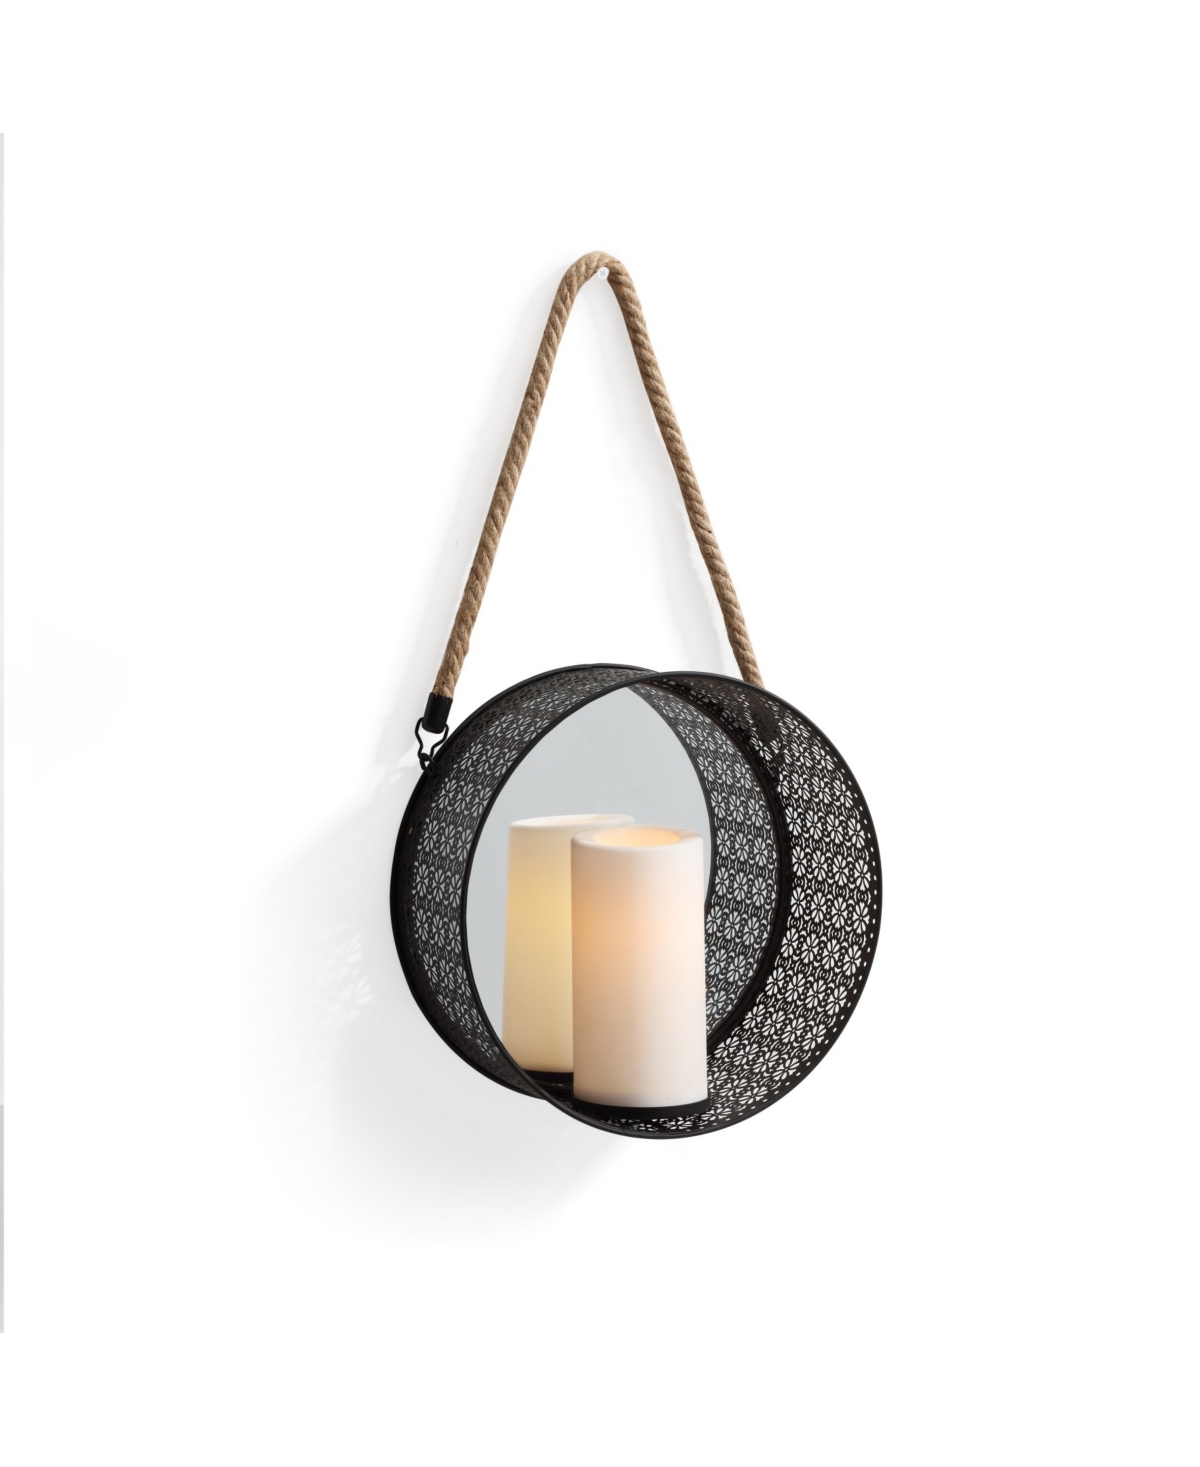 Danya B . Round Mirror Pillar Candle Sconce With Filigree Metal Frame In Black